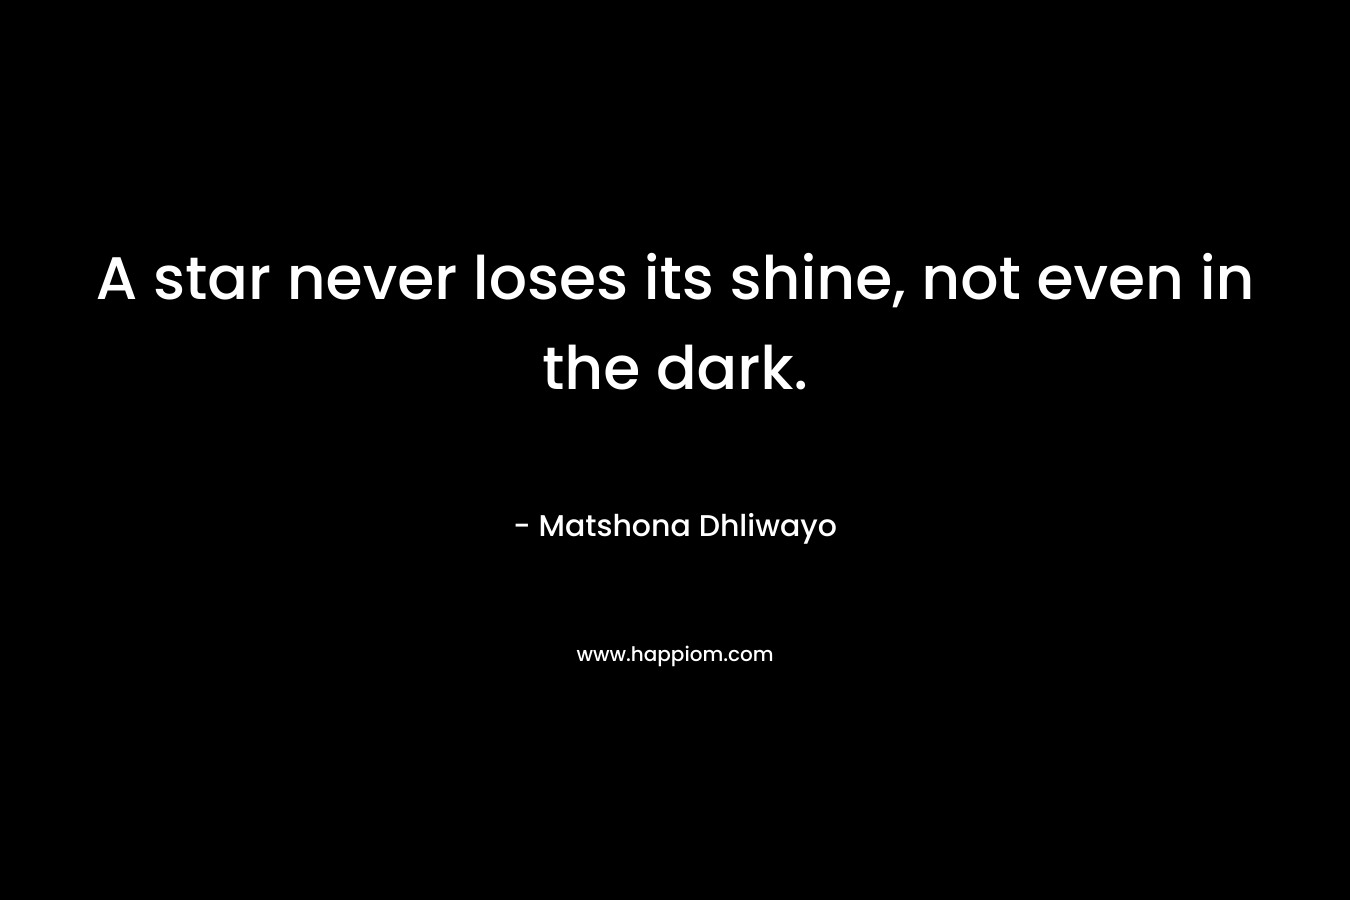 A star never loses its shine, not even in the dark.